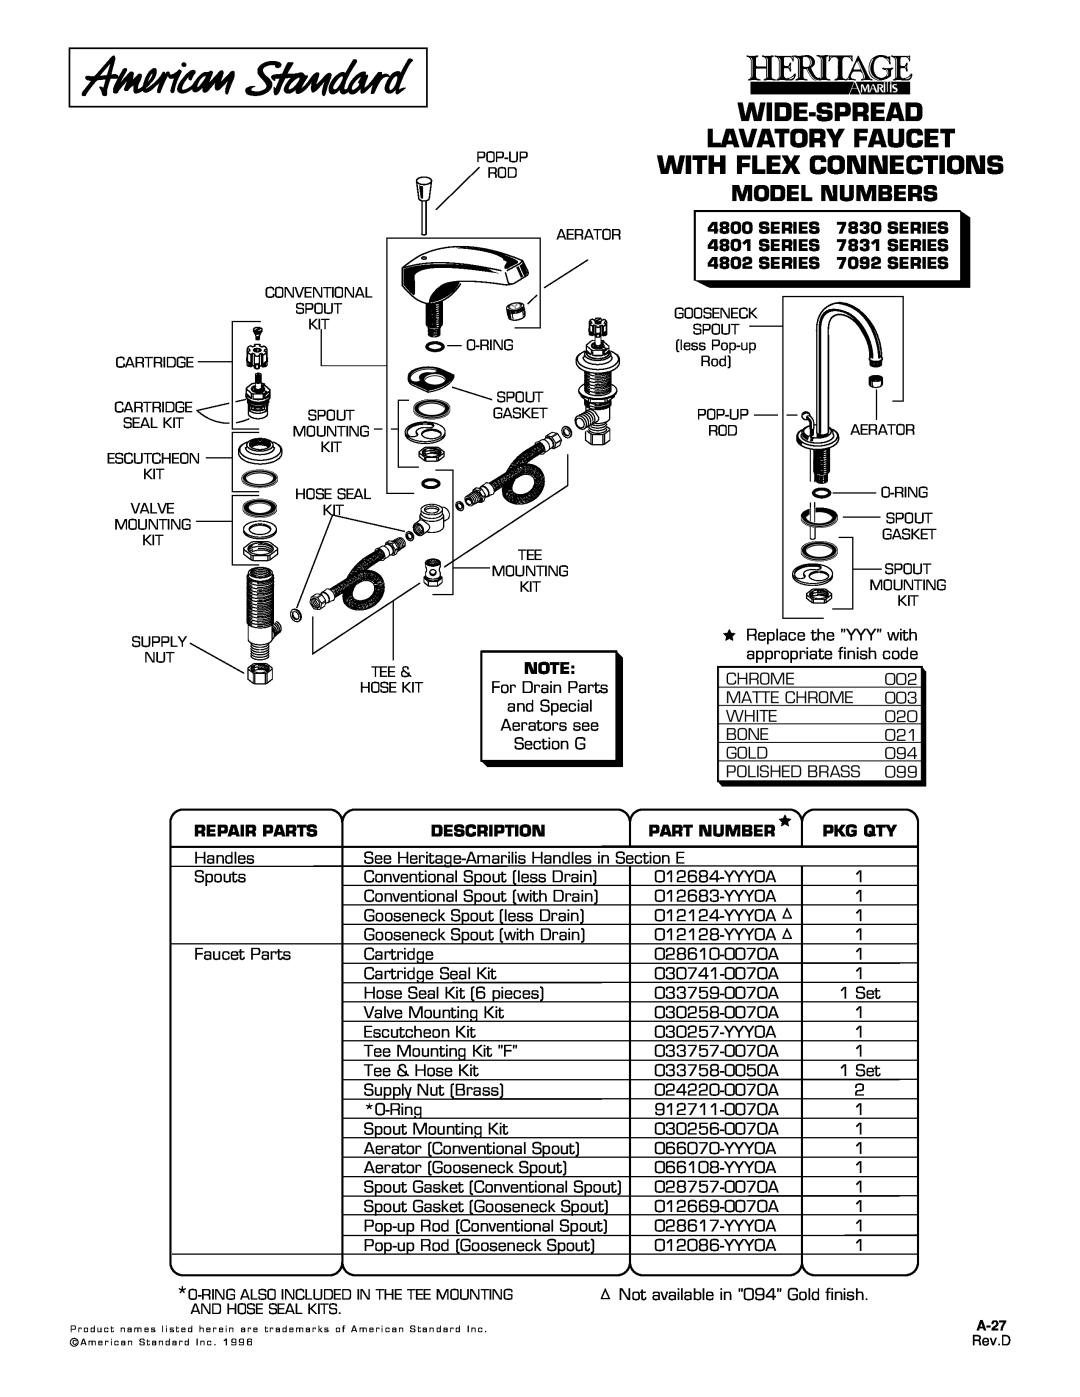 American Standard manual Wide-Spread Lavatory Faucet With Flex Connections, Model Numbers, SERIES 7092 SERIES, Pkg Qty 